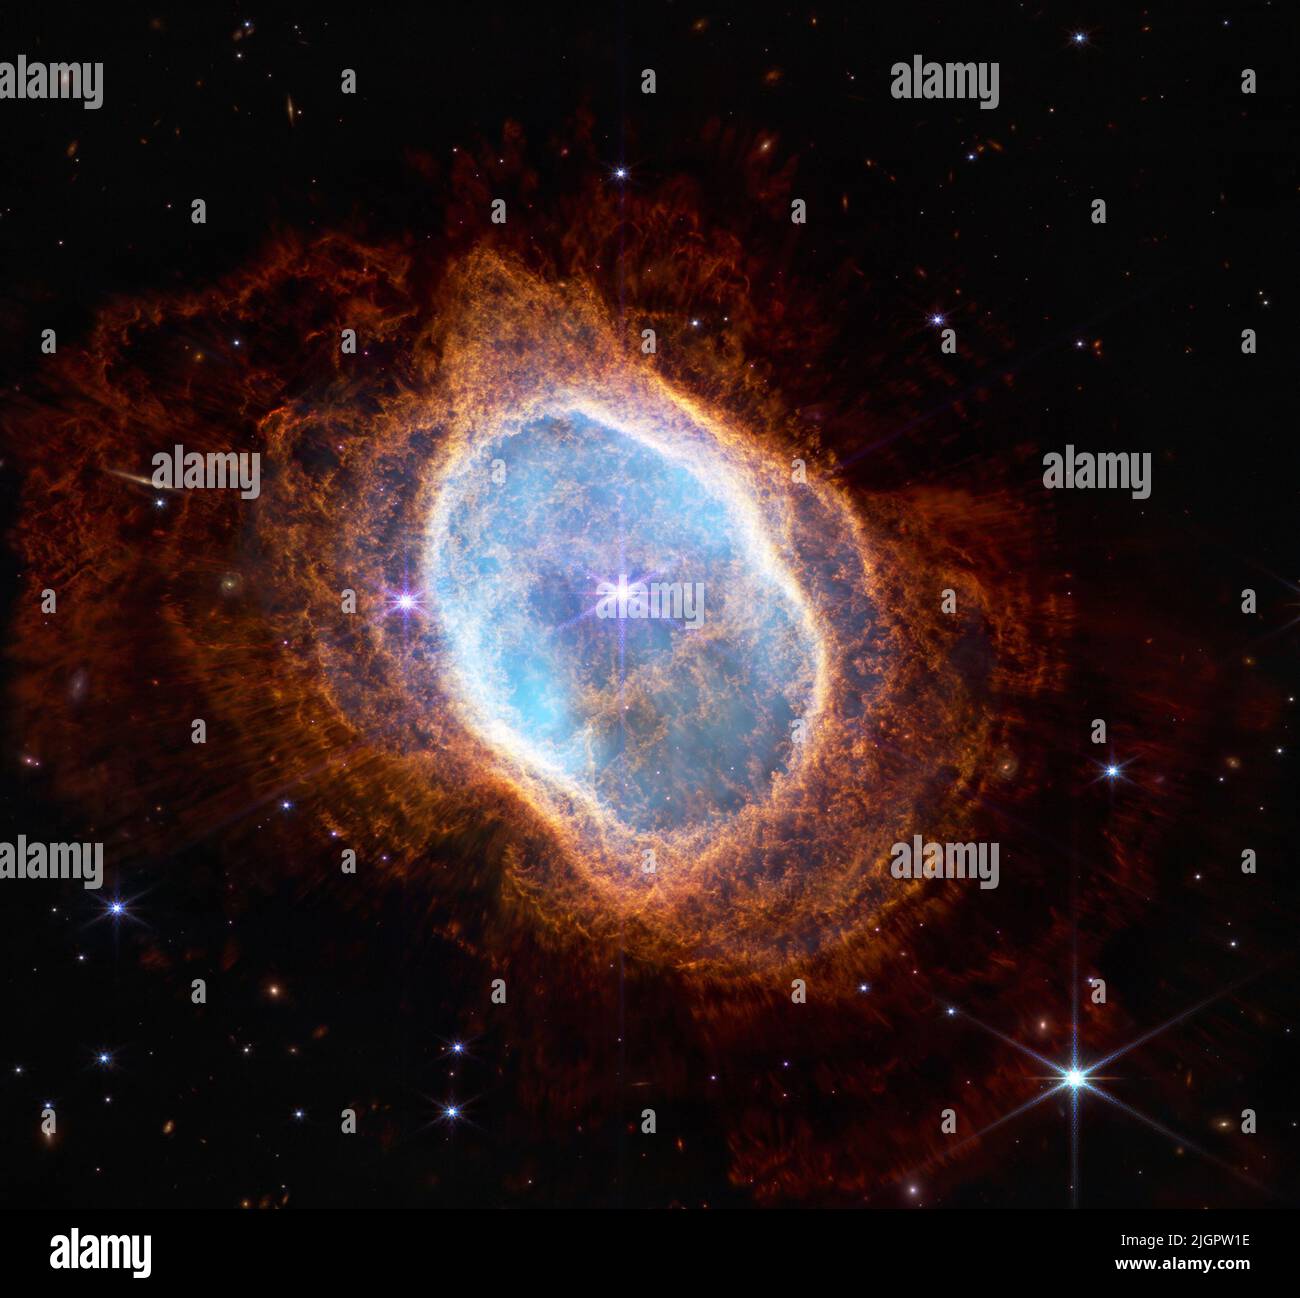 July 12, 2022: Observation of the Southern Ring Nebula in near-infrared light, at left from NASA's Webb Telescope. This scene was created by a white dwarf star, the remains of a star like our Sun after it shed its outer layers and stopped burning fuel though nuclear fusion. Those outer layers now form the ejected shells all along this view. In the Near-Infrared Camera (NIRCam) image, the white dwarf appears to the lower left of the bright, central star, partially hidden by a diffraction spike. This white dwarf star is cloaked in thick layers of dust. Over thousands of years and before it beca Stock Photo